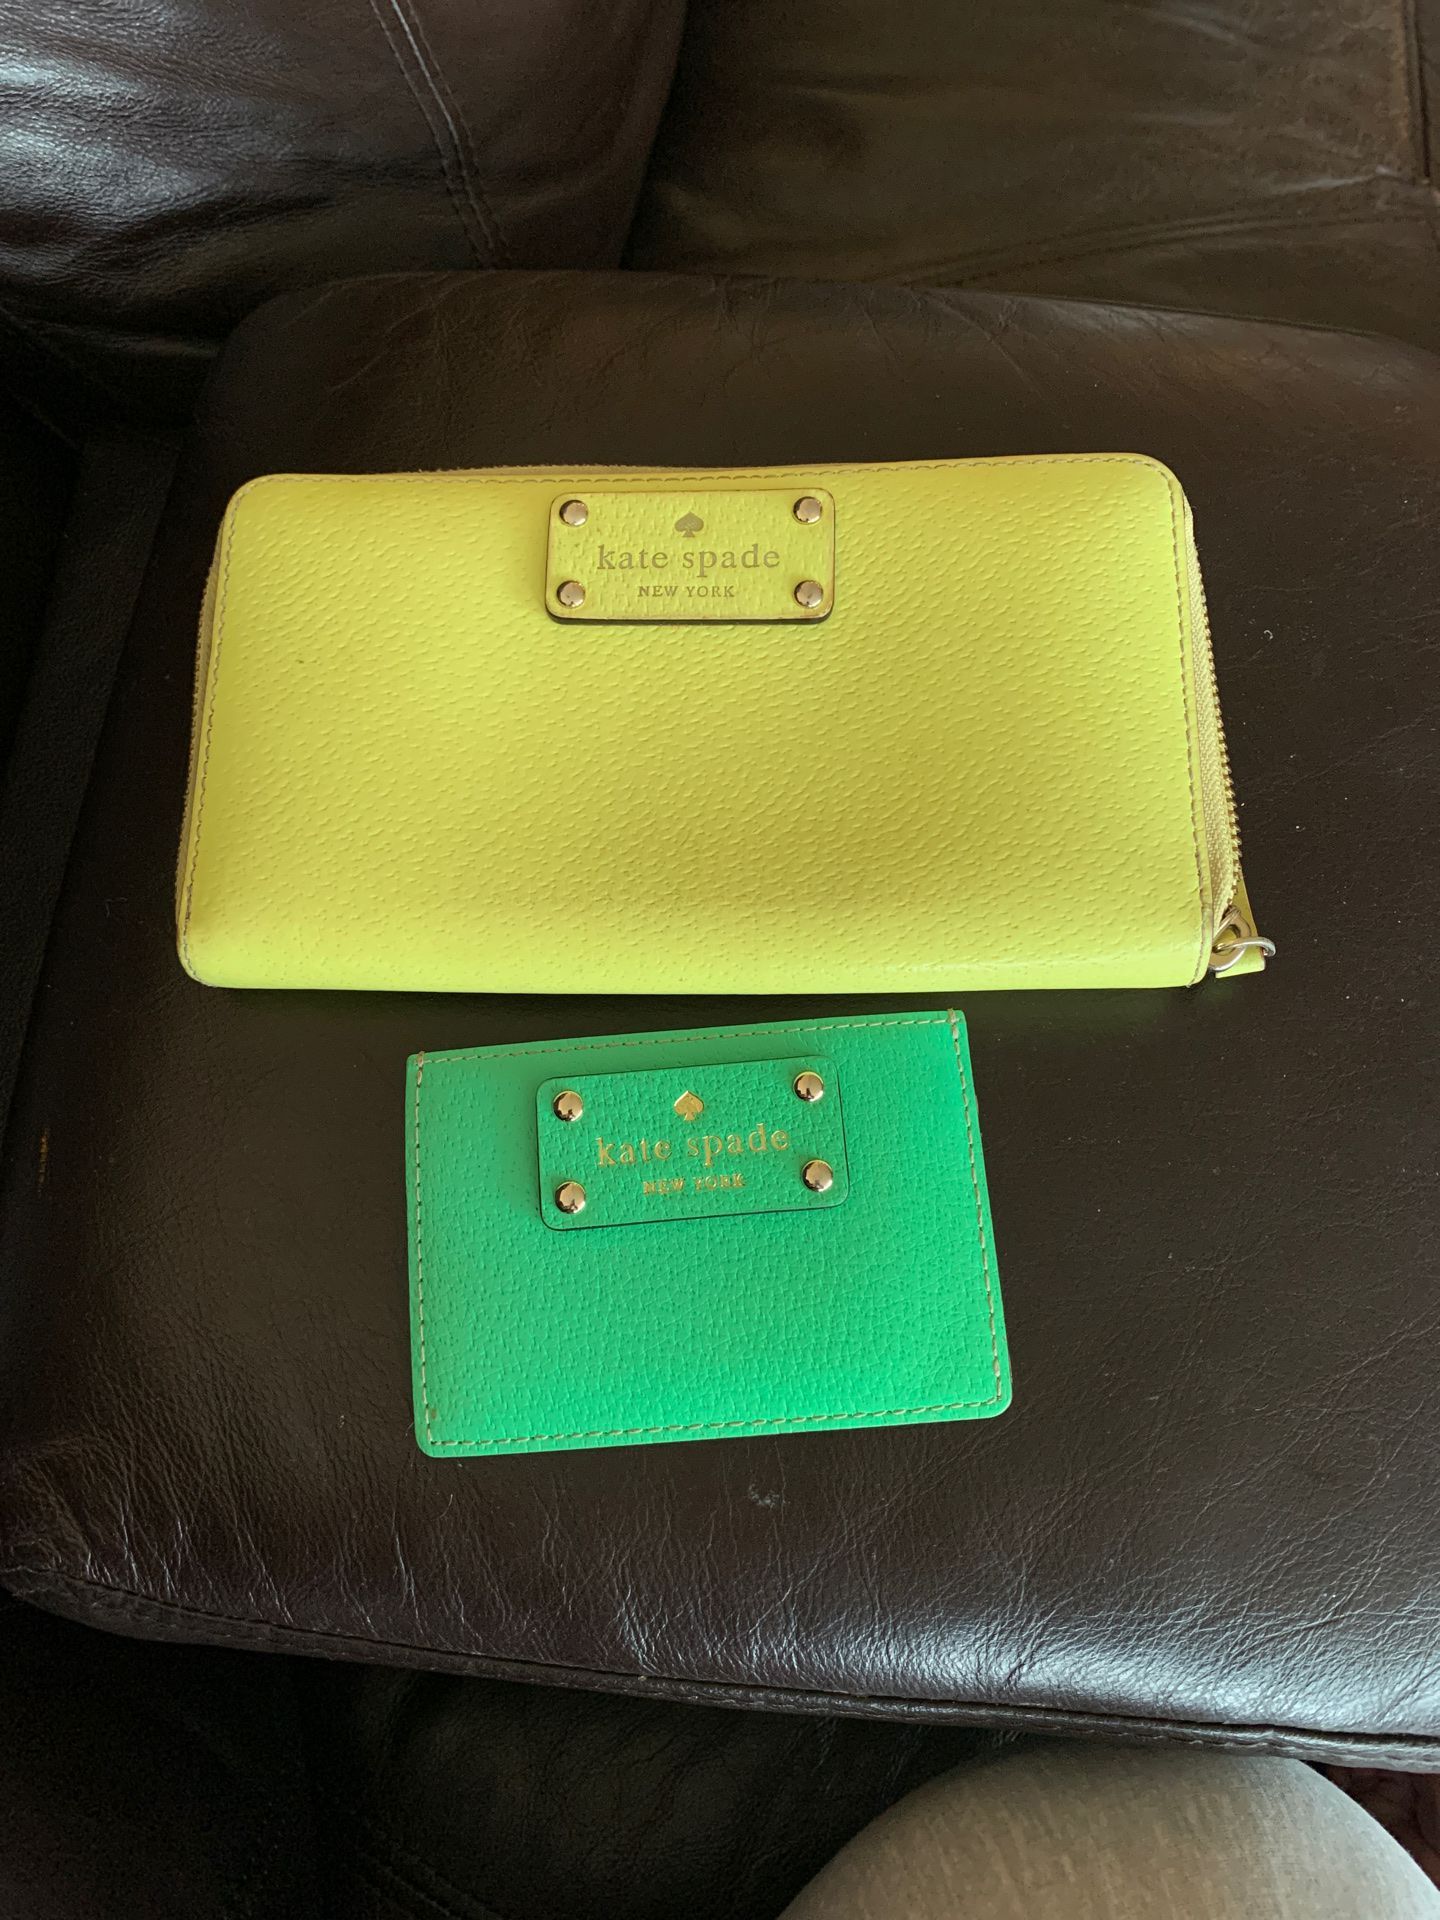 Kate spade wallet and card holder